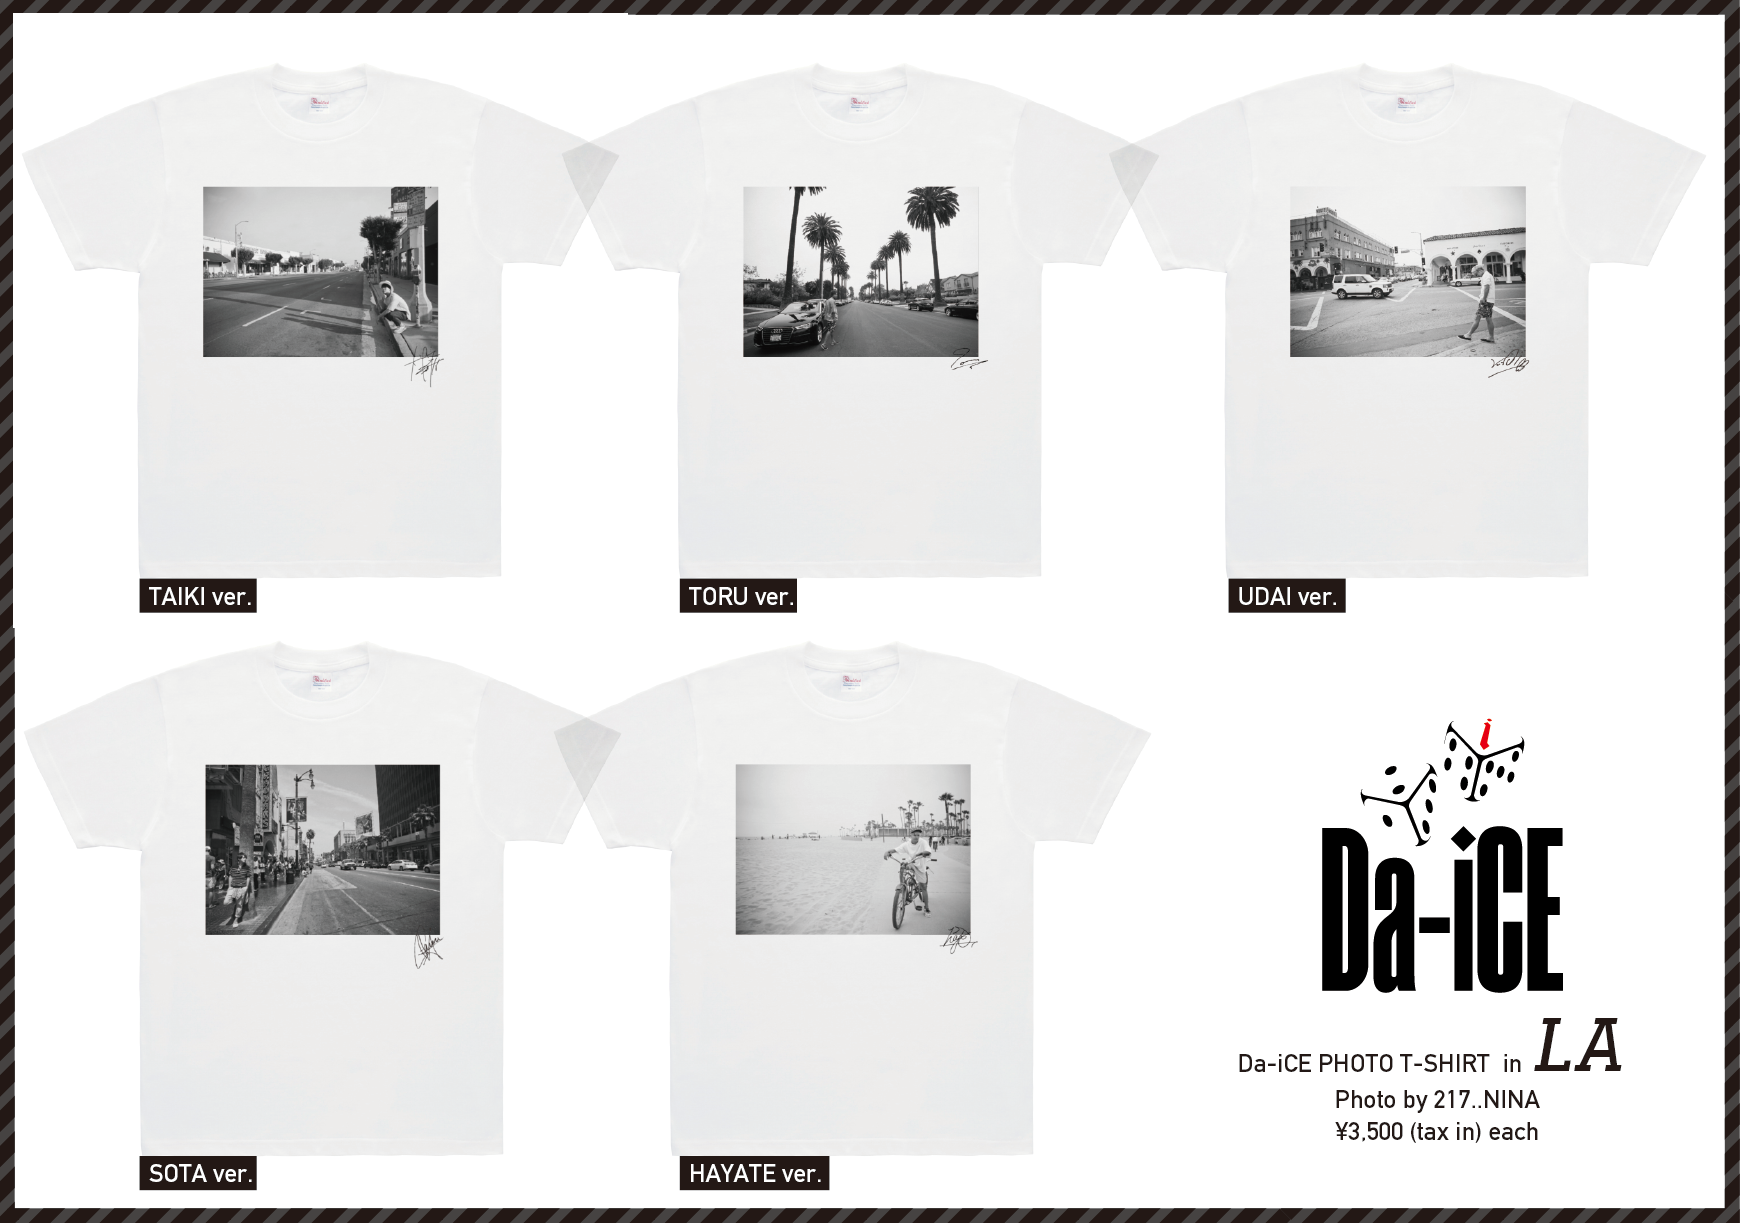 Da-iCE PHOTO T-shirt completed! NEWS | Da-iCE Official Site